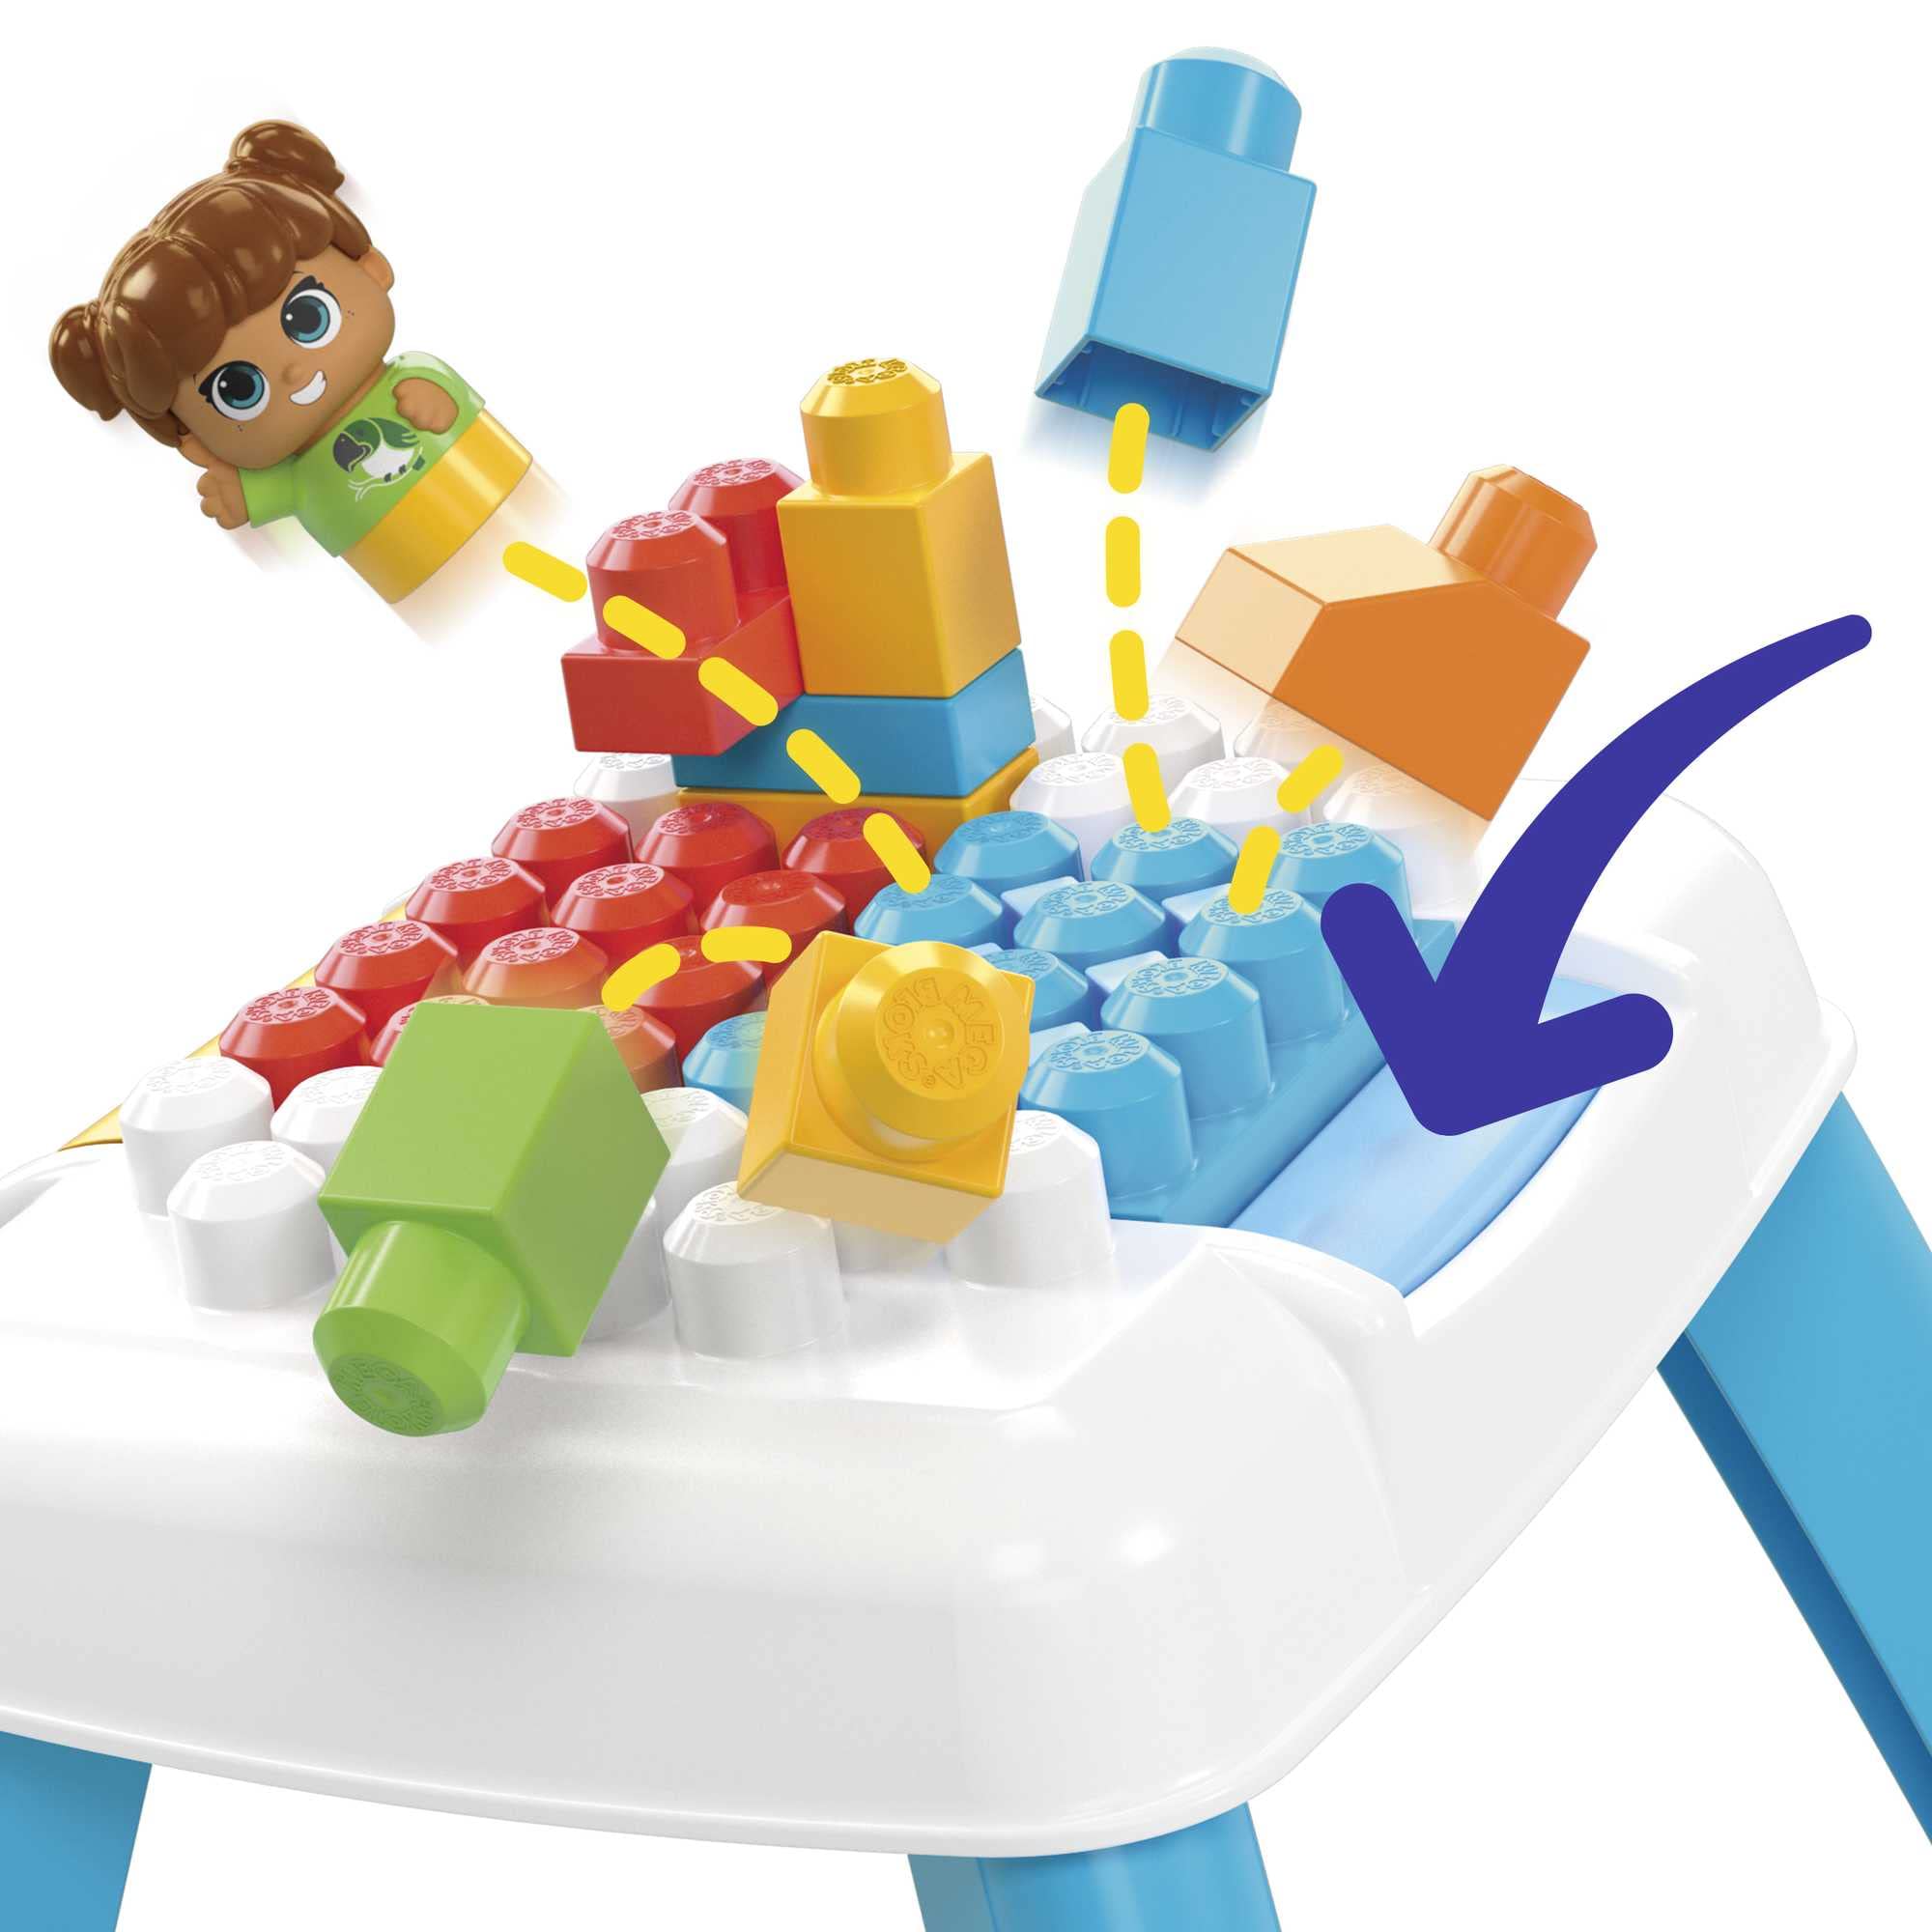 MEGA BLOKS Fisher Price Toddler Building Blocks, Build N Tumble Activity Table With 25 Pieces and Storage, 1 Figure, Toy Gift Ideas For Kids